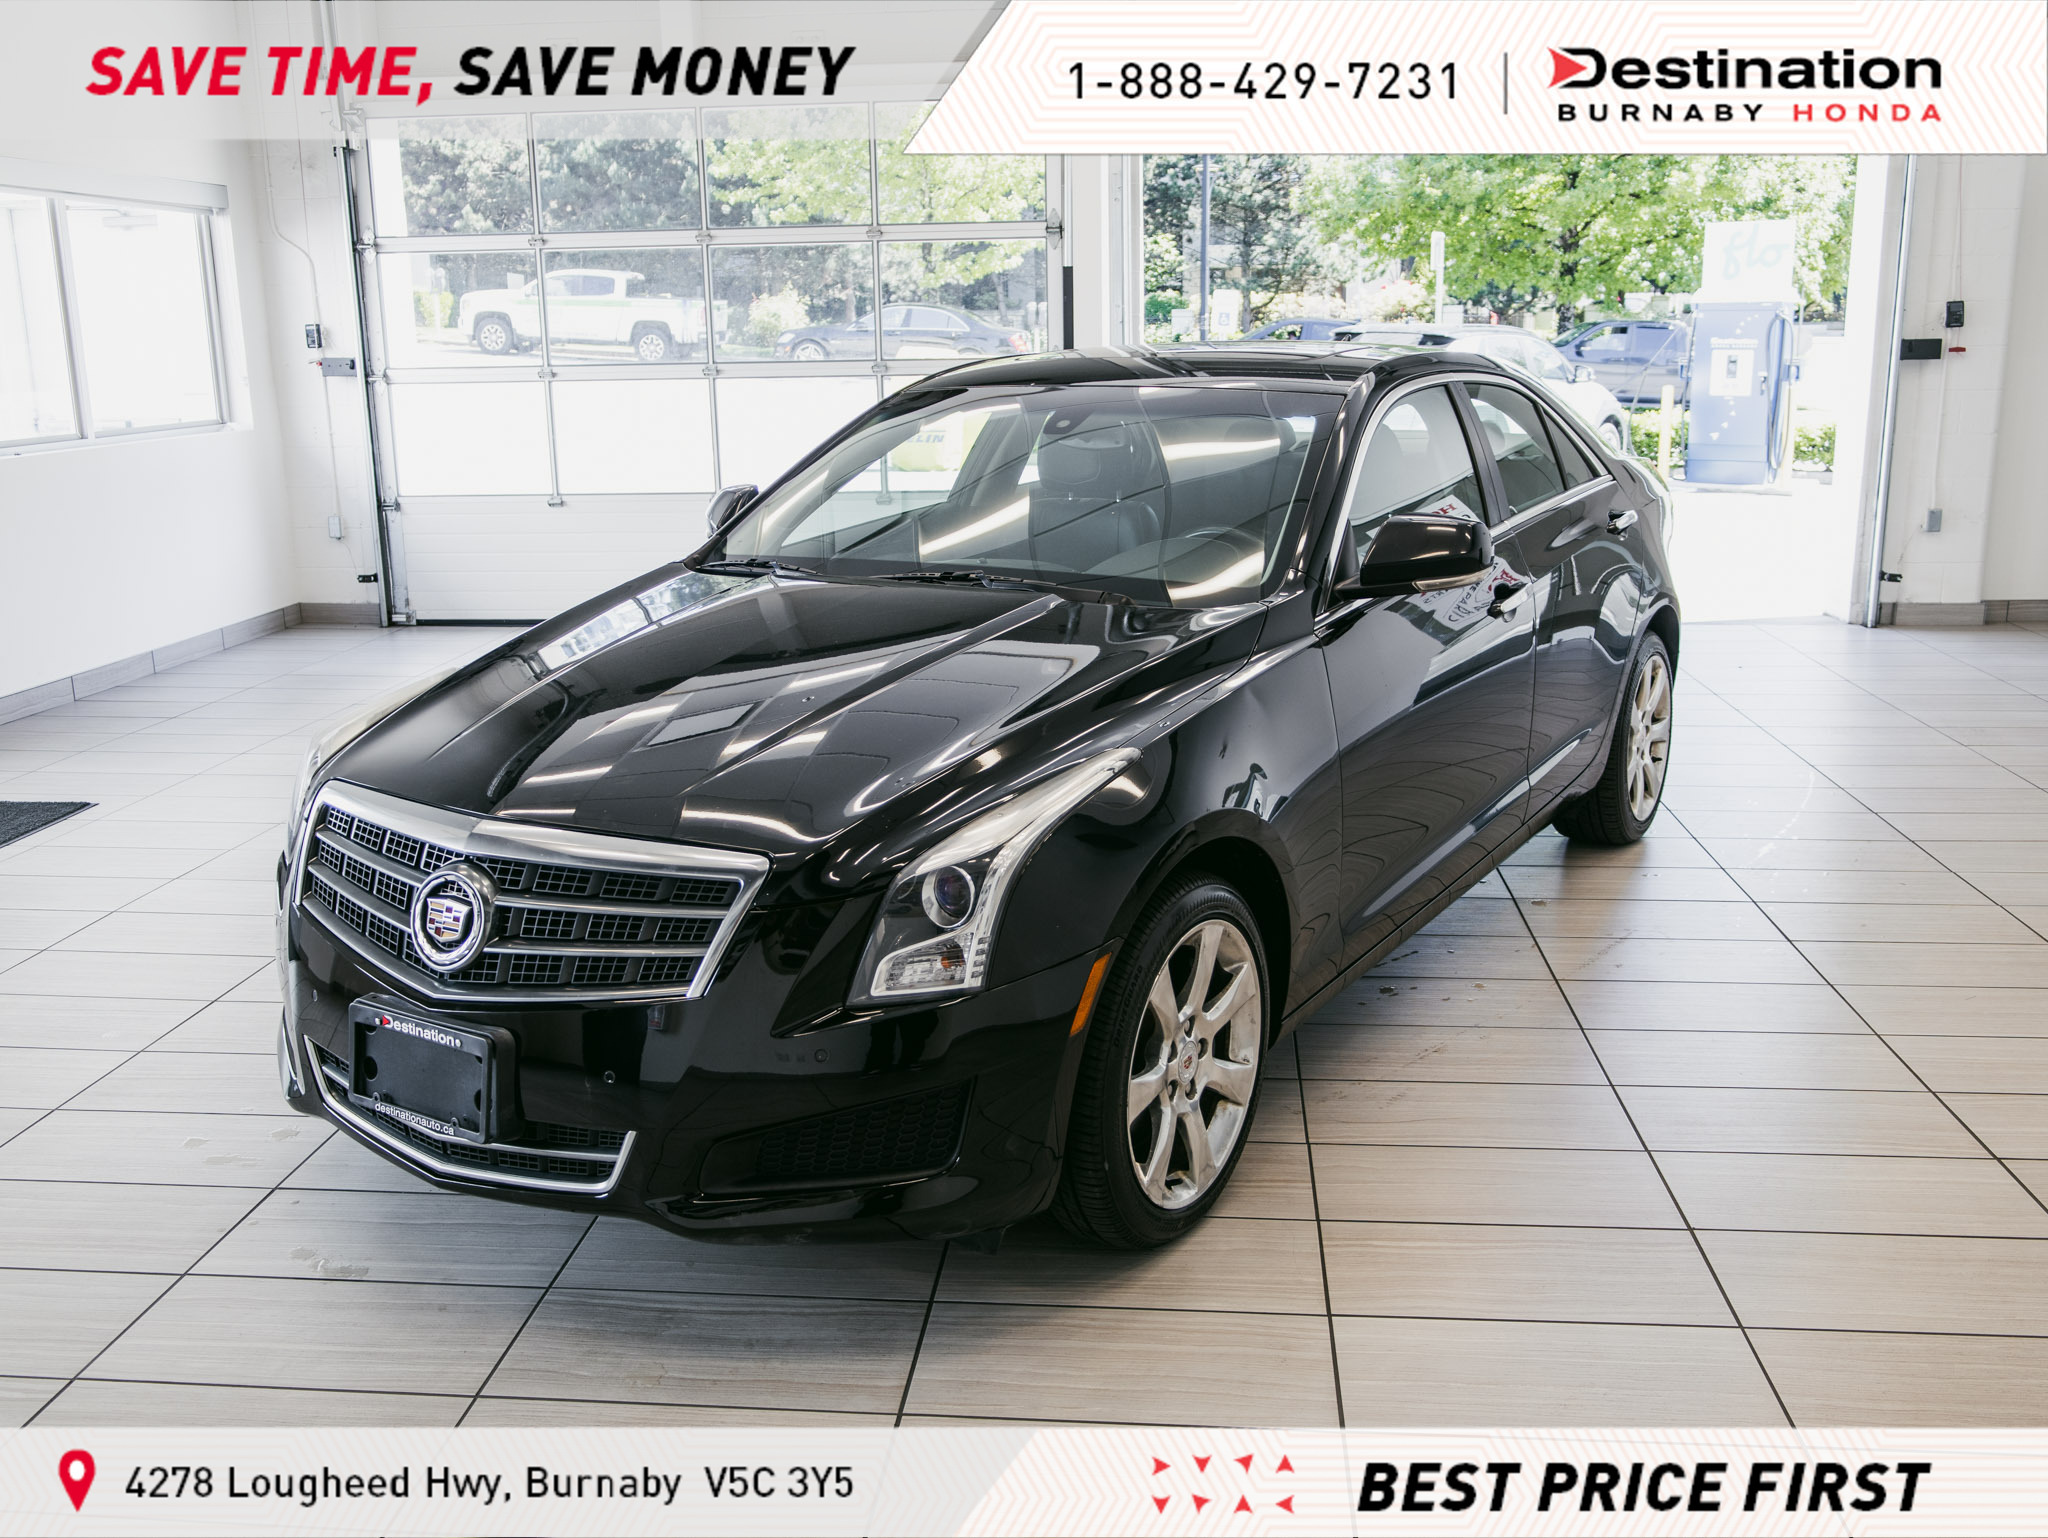 2014 Cadillac ATS 4dr Sdn 2.0L Luxury AWD - LOADED - LUXURY!